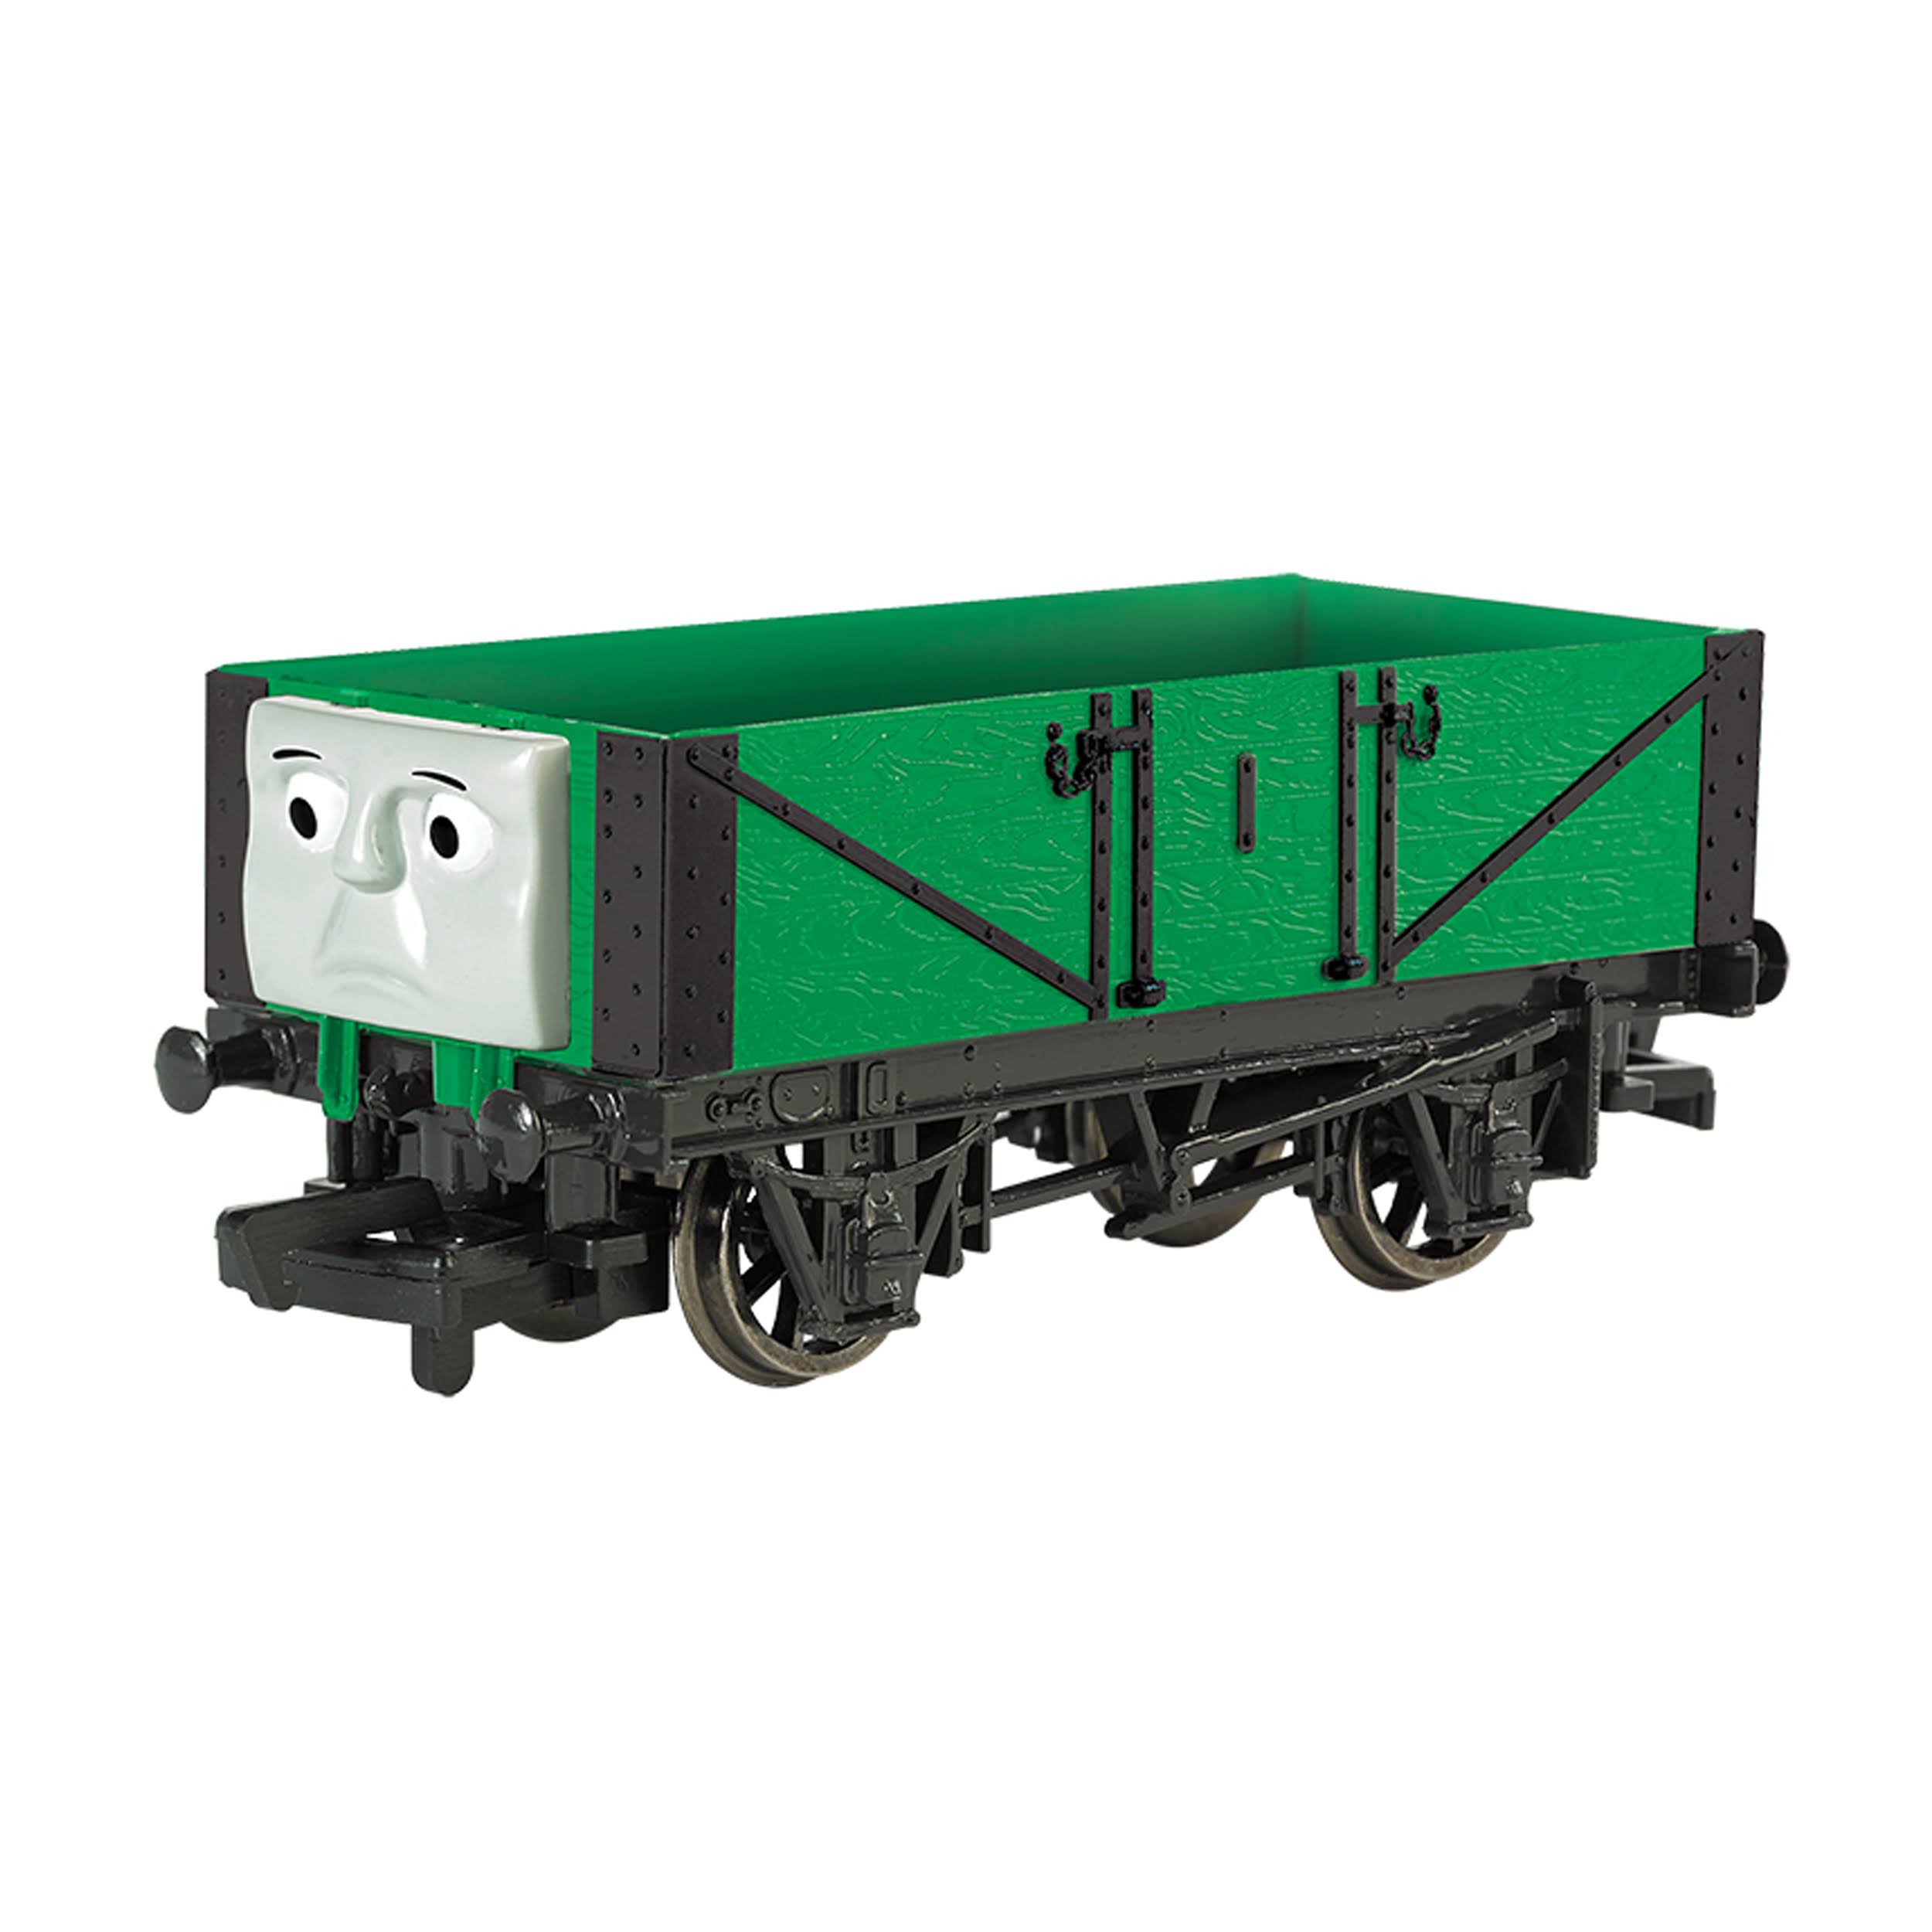 Bachmann Trains Thomas and Friends Troublesome Truck Number 4 Train Model Toy - HO Scale